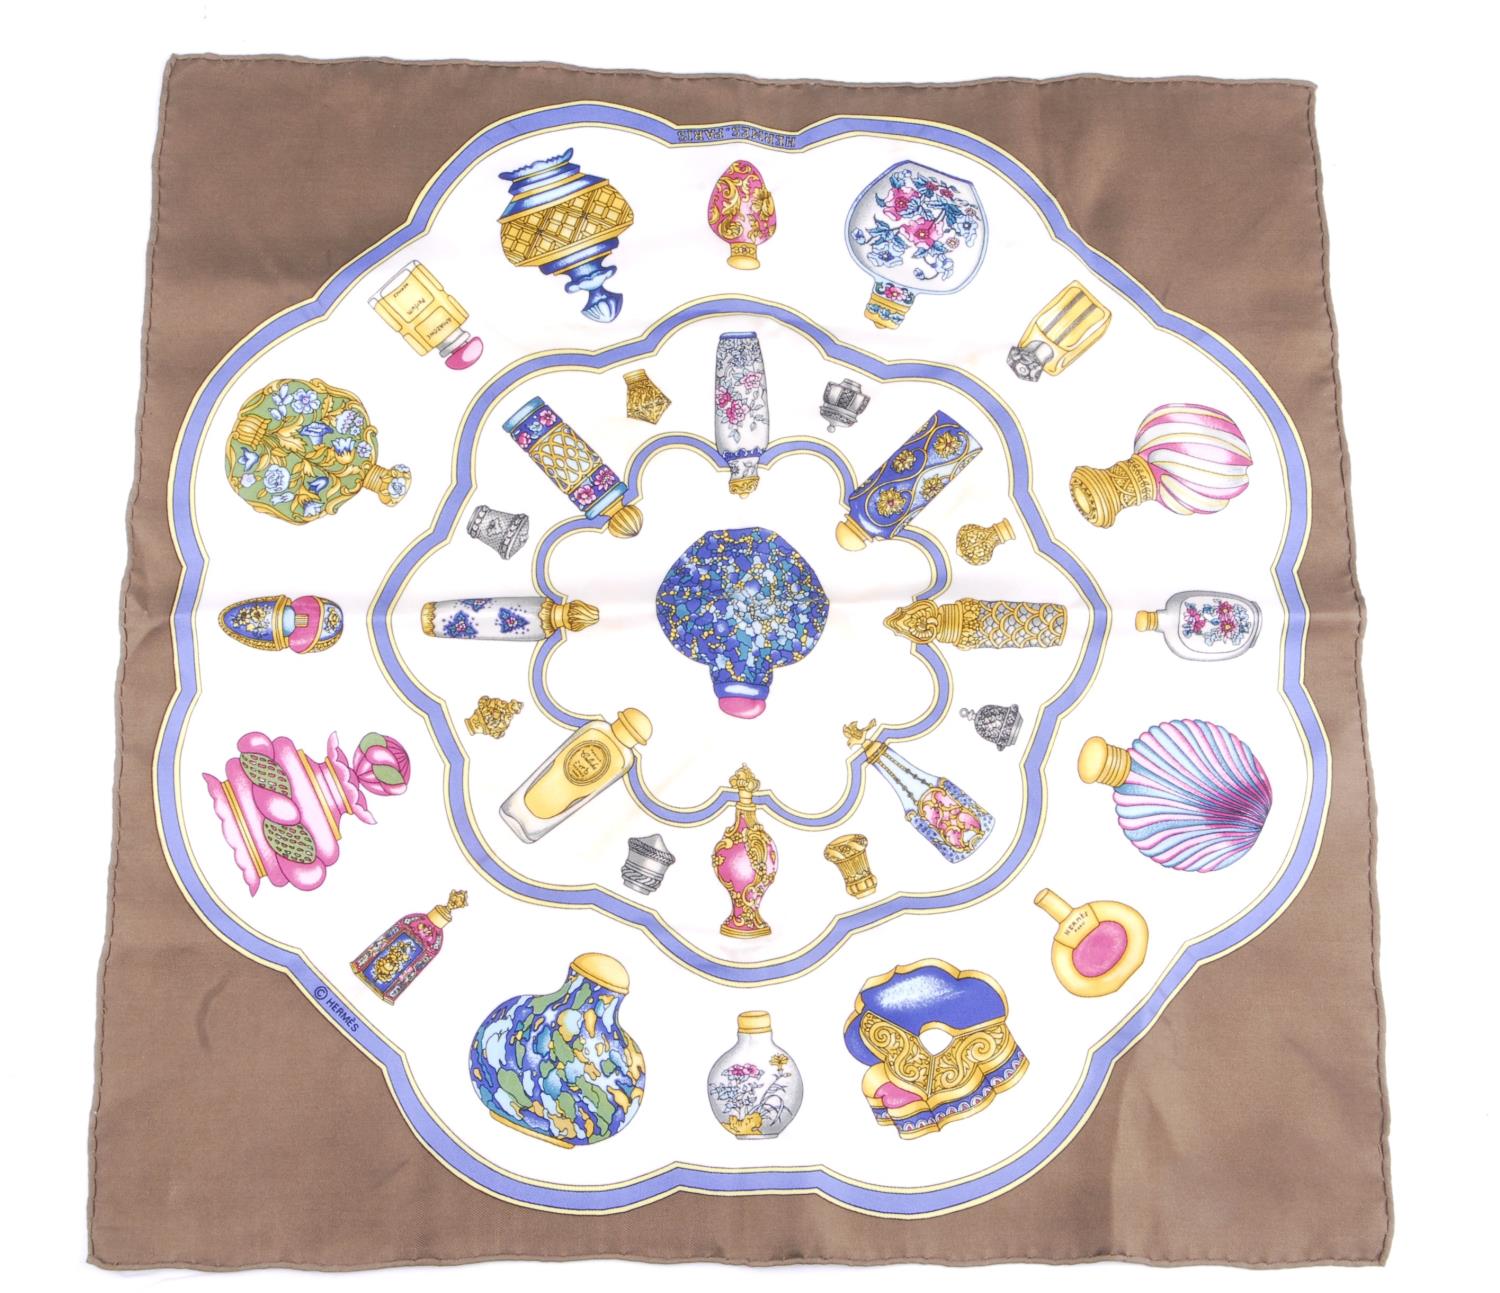 HERMÈS - a small 'Perfume Bottles' scarf. Featuring assorted antique perfume bottles printed - Image 2 of 2